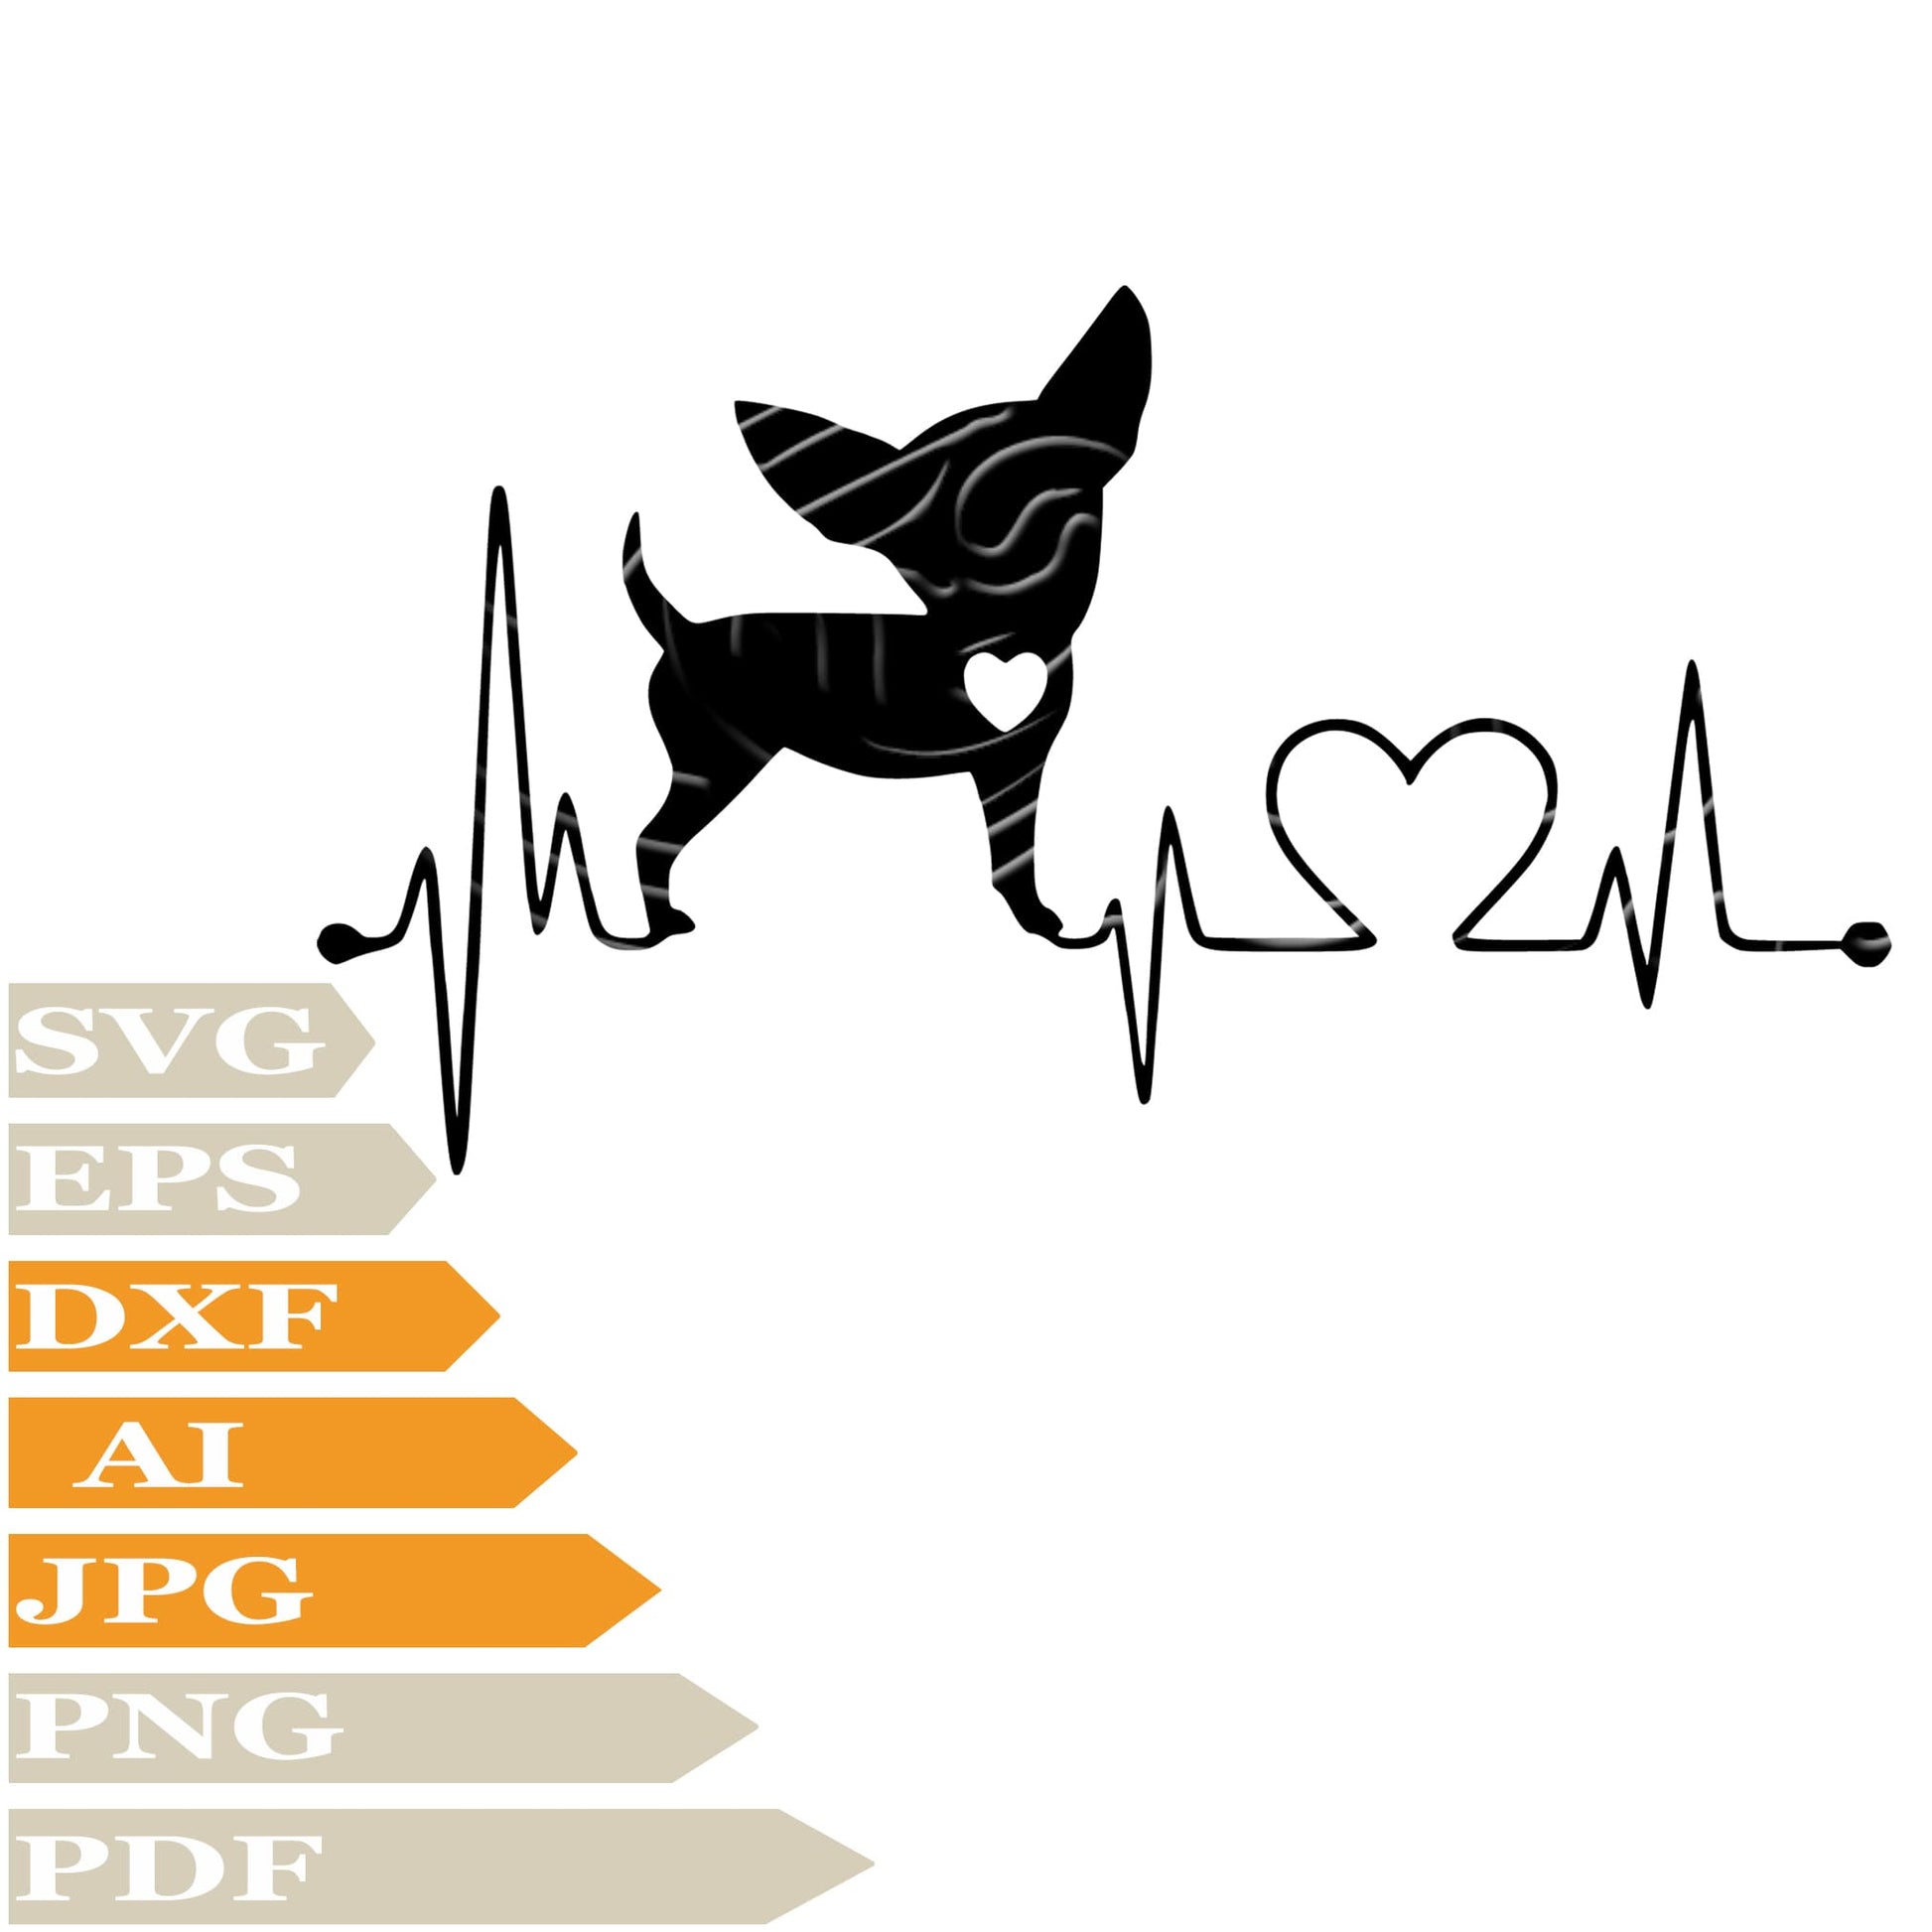 Chihuahua, Chihuahua Funny Dog Svg File, Image Cut, Png, For Tattoo, Silhouette, Digital Vector Download, Cut File, Clipart, For Cricut